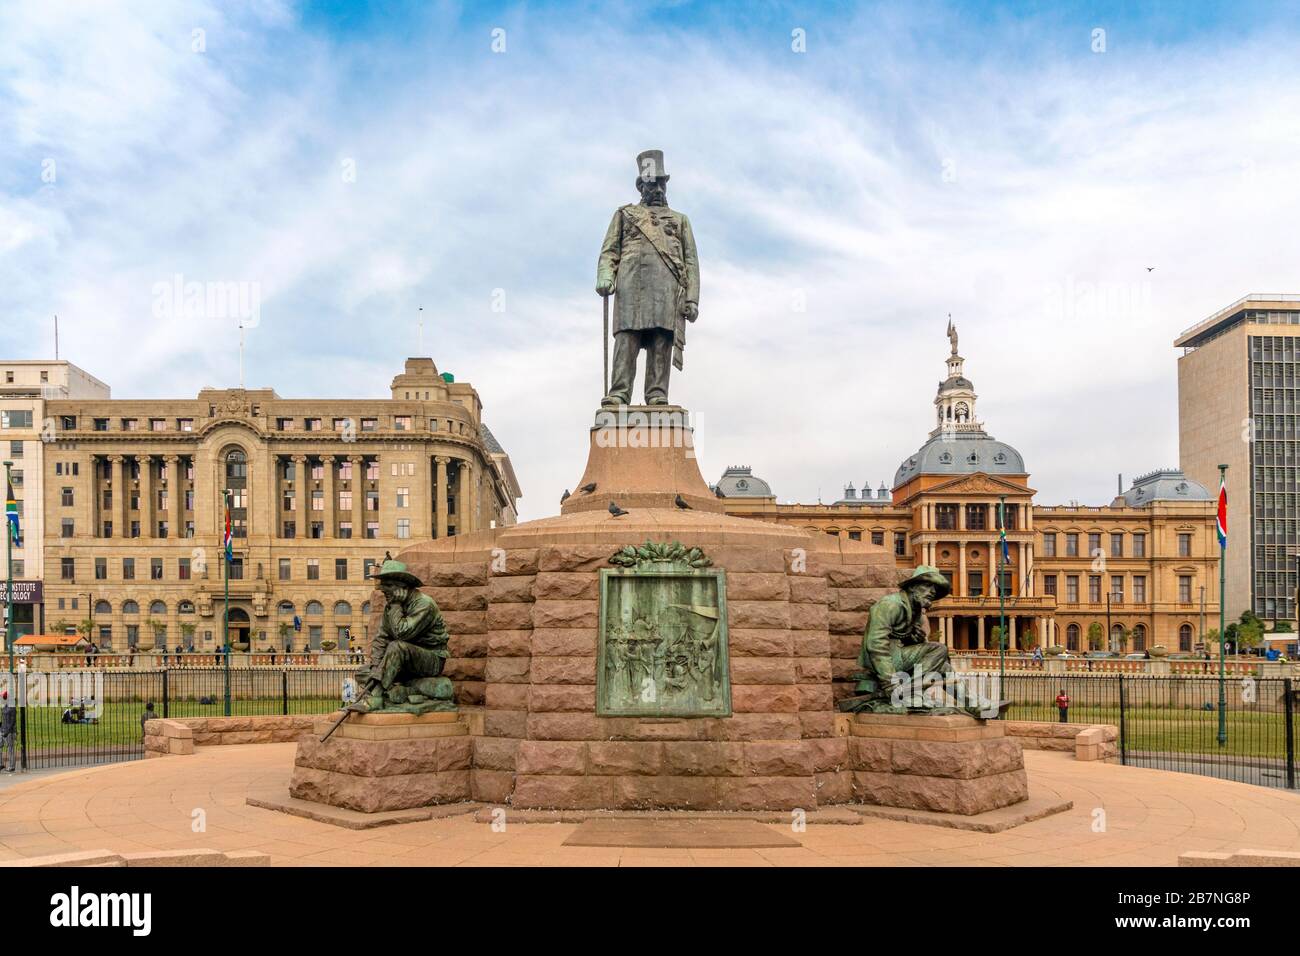 Statue on Church Square in Pretoria Central, capital city of South Africa Stock Photo